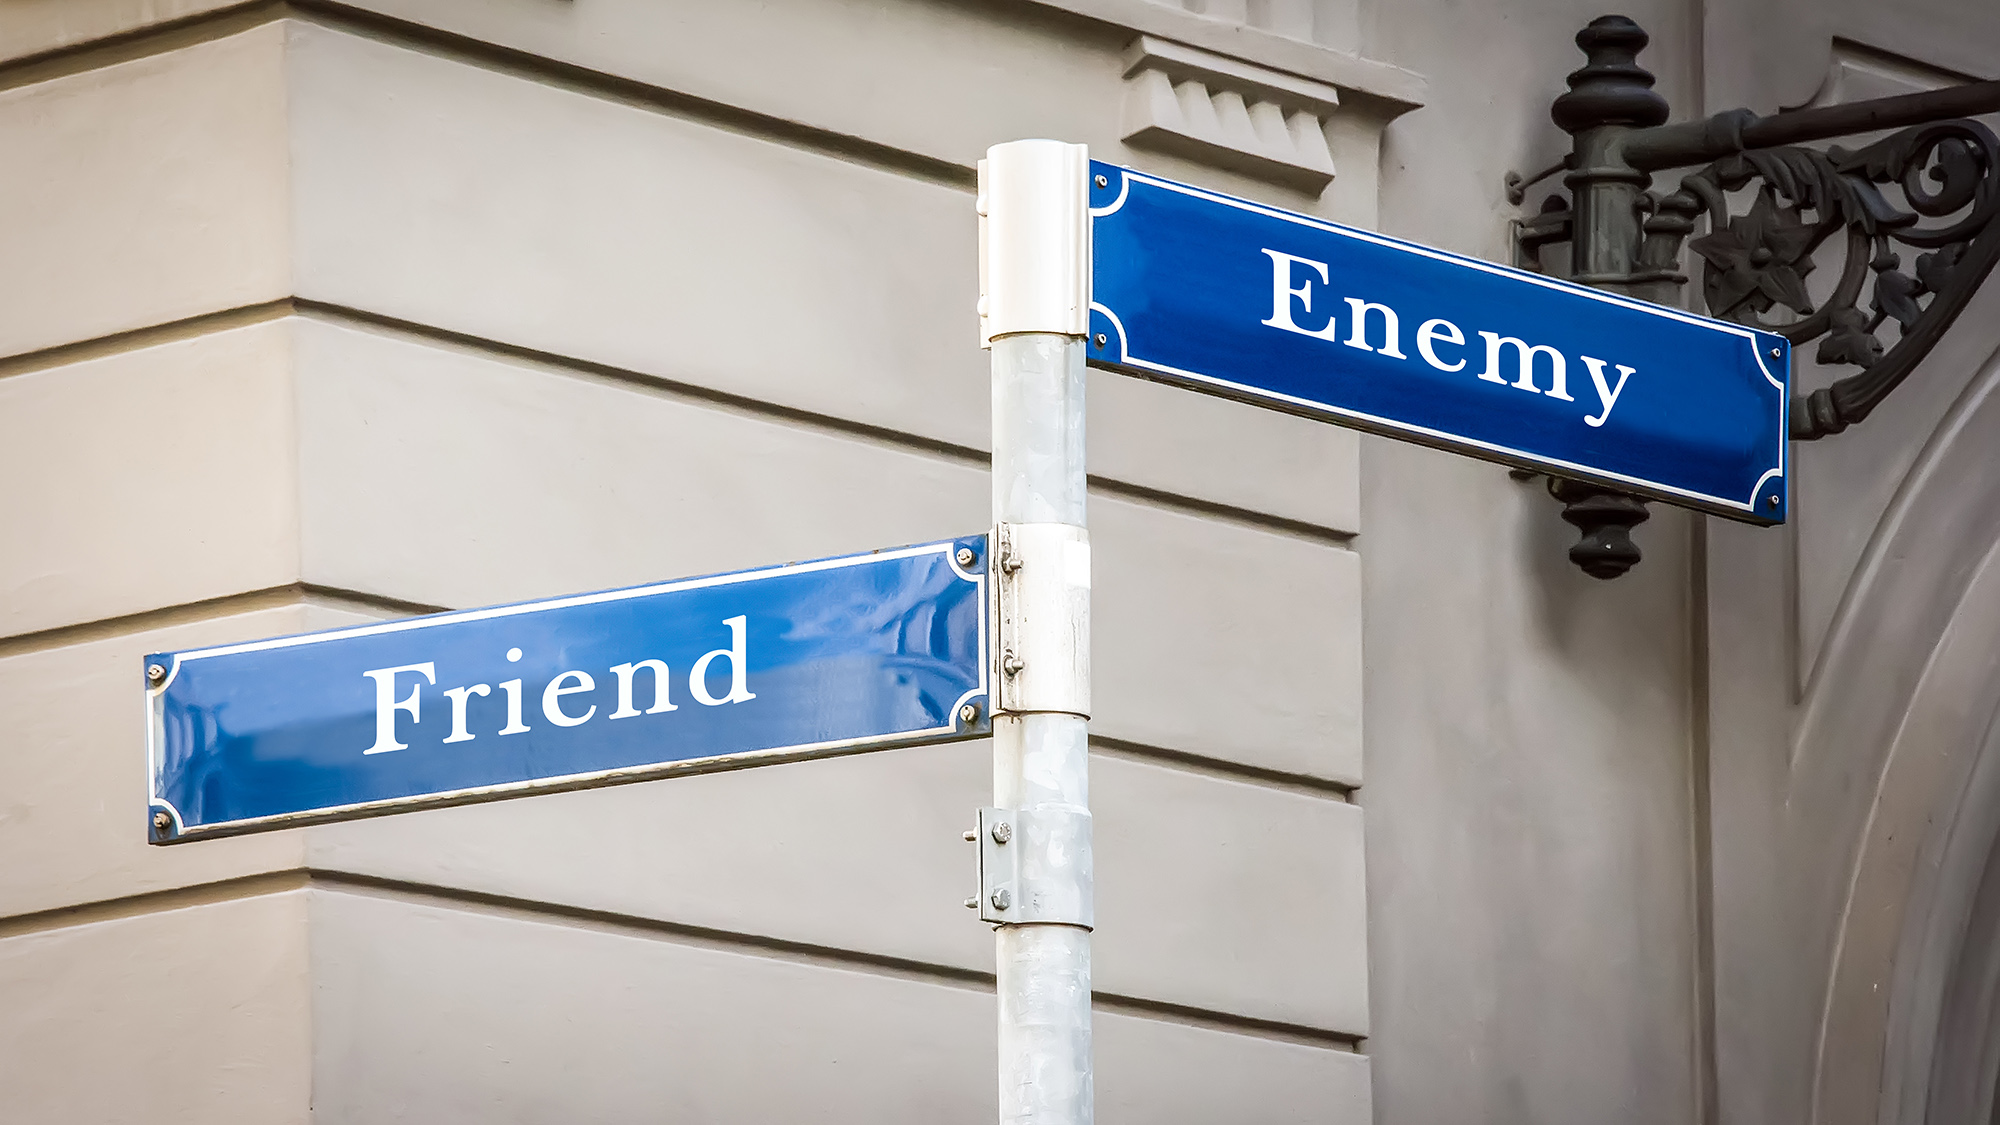 Enemies can be our best spiritual friends - a reflection from Fr Laurence Freeman